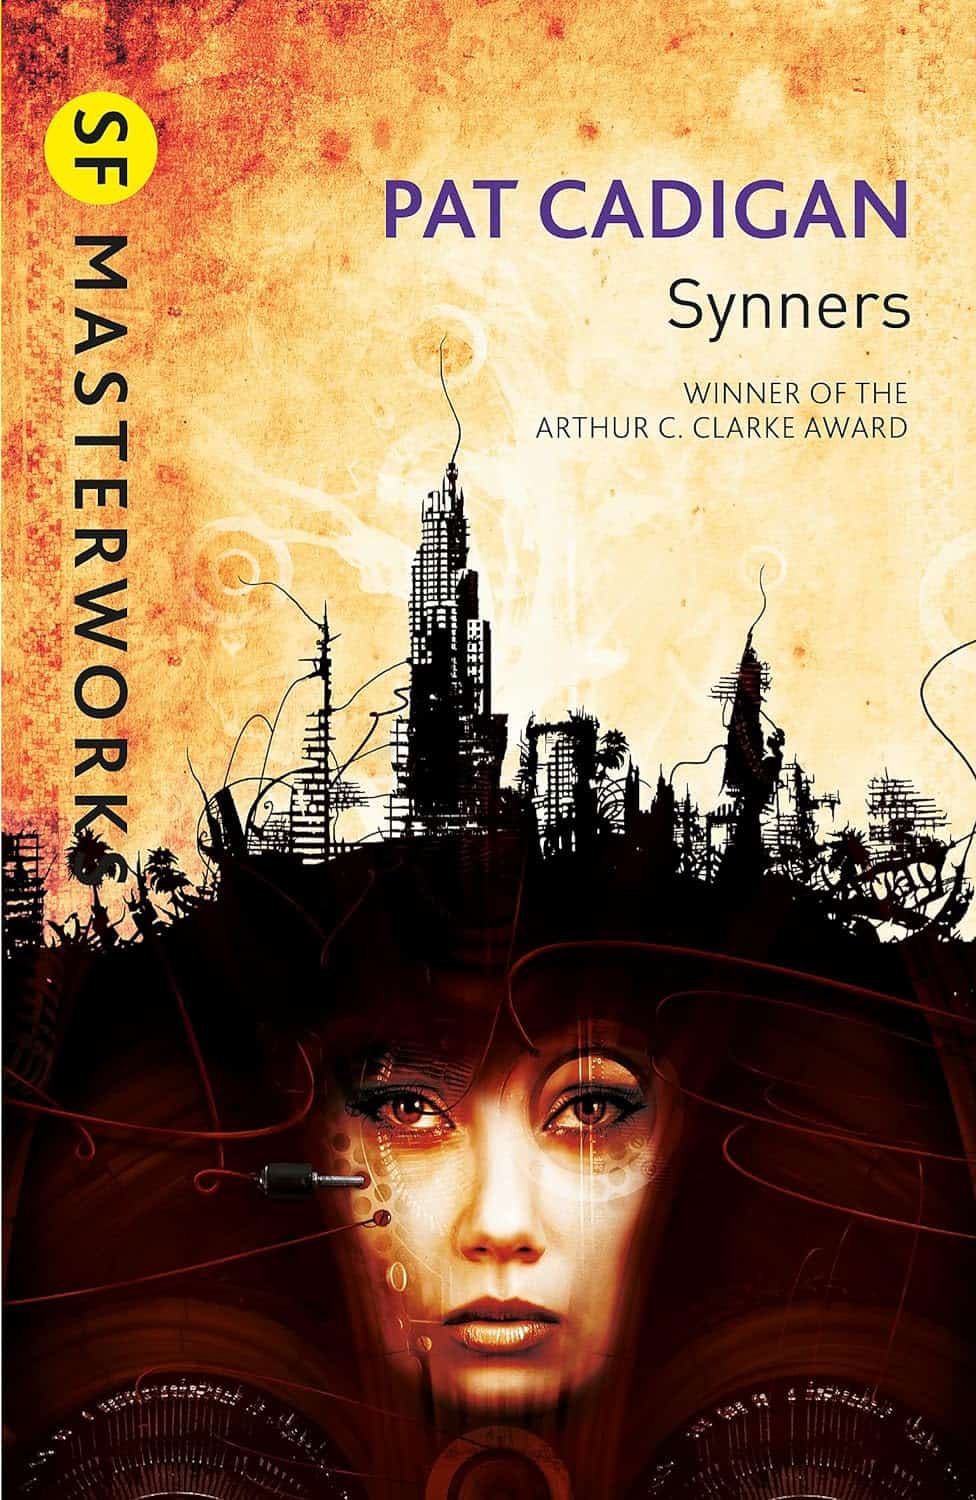 Synners by Pat Cadigan (1991)